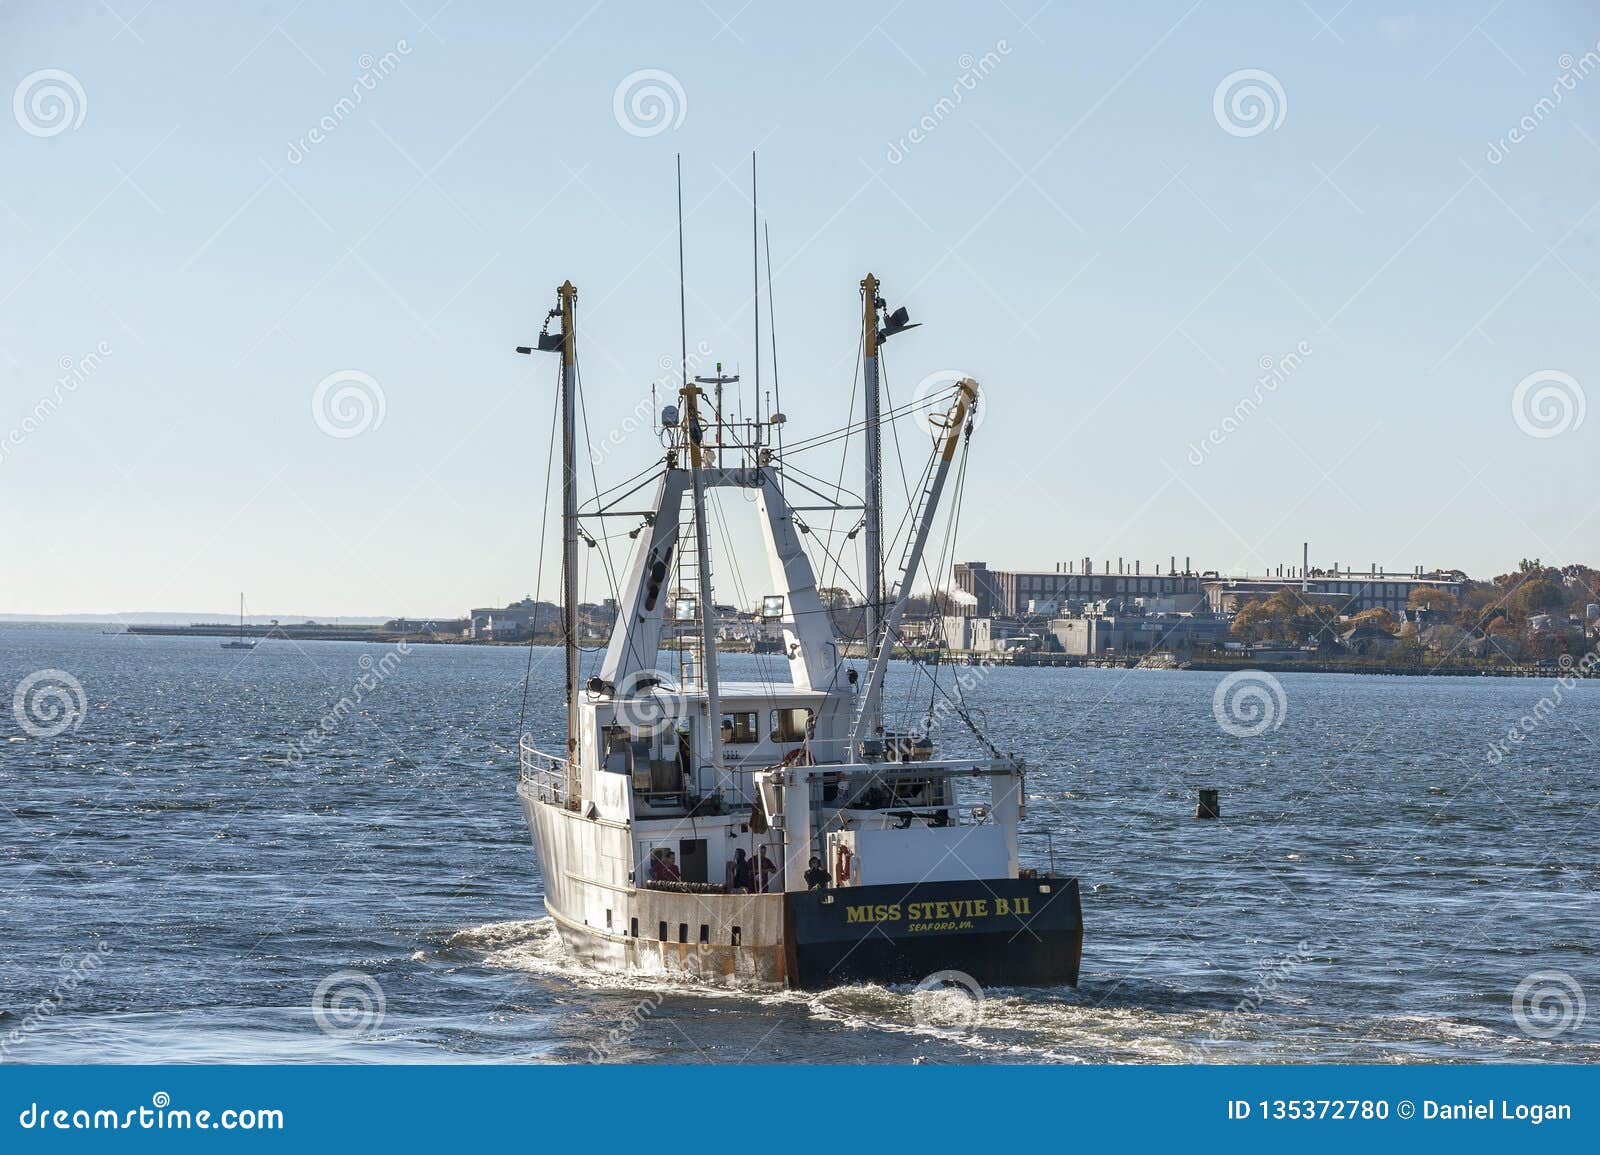 Commercial Fishing Boat Miss Stevie B II Going Fishing Editorial